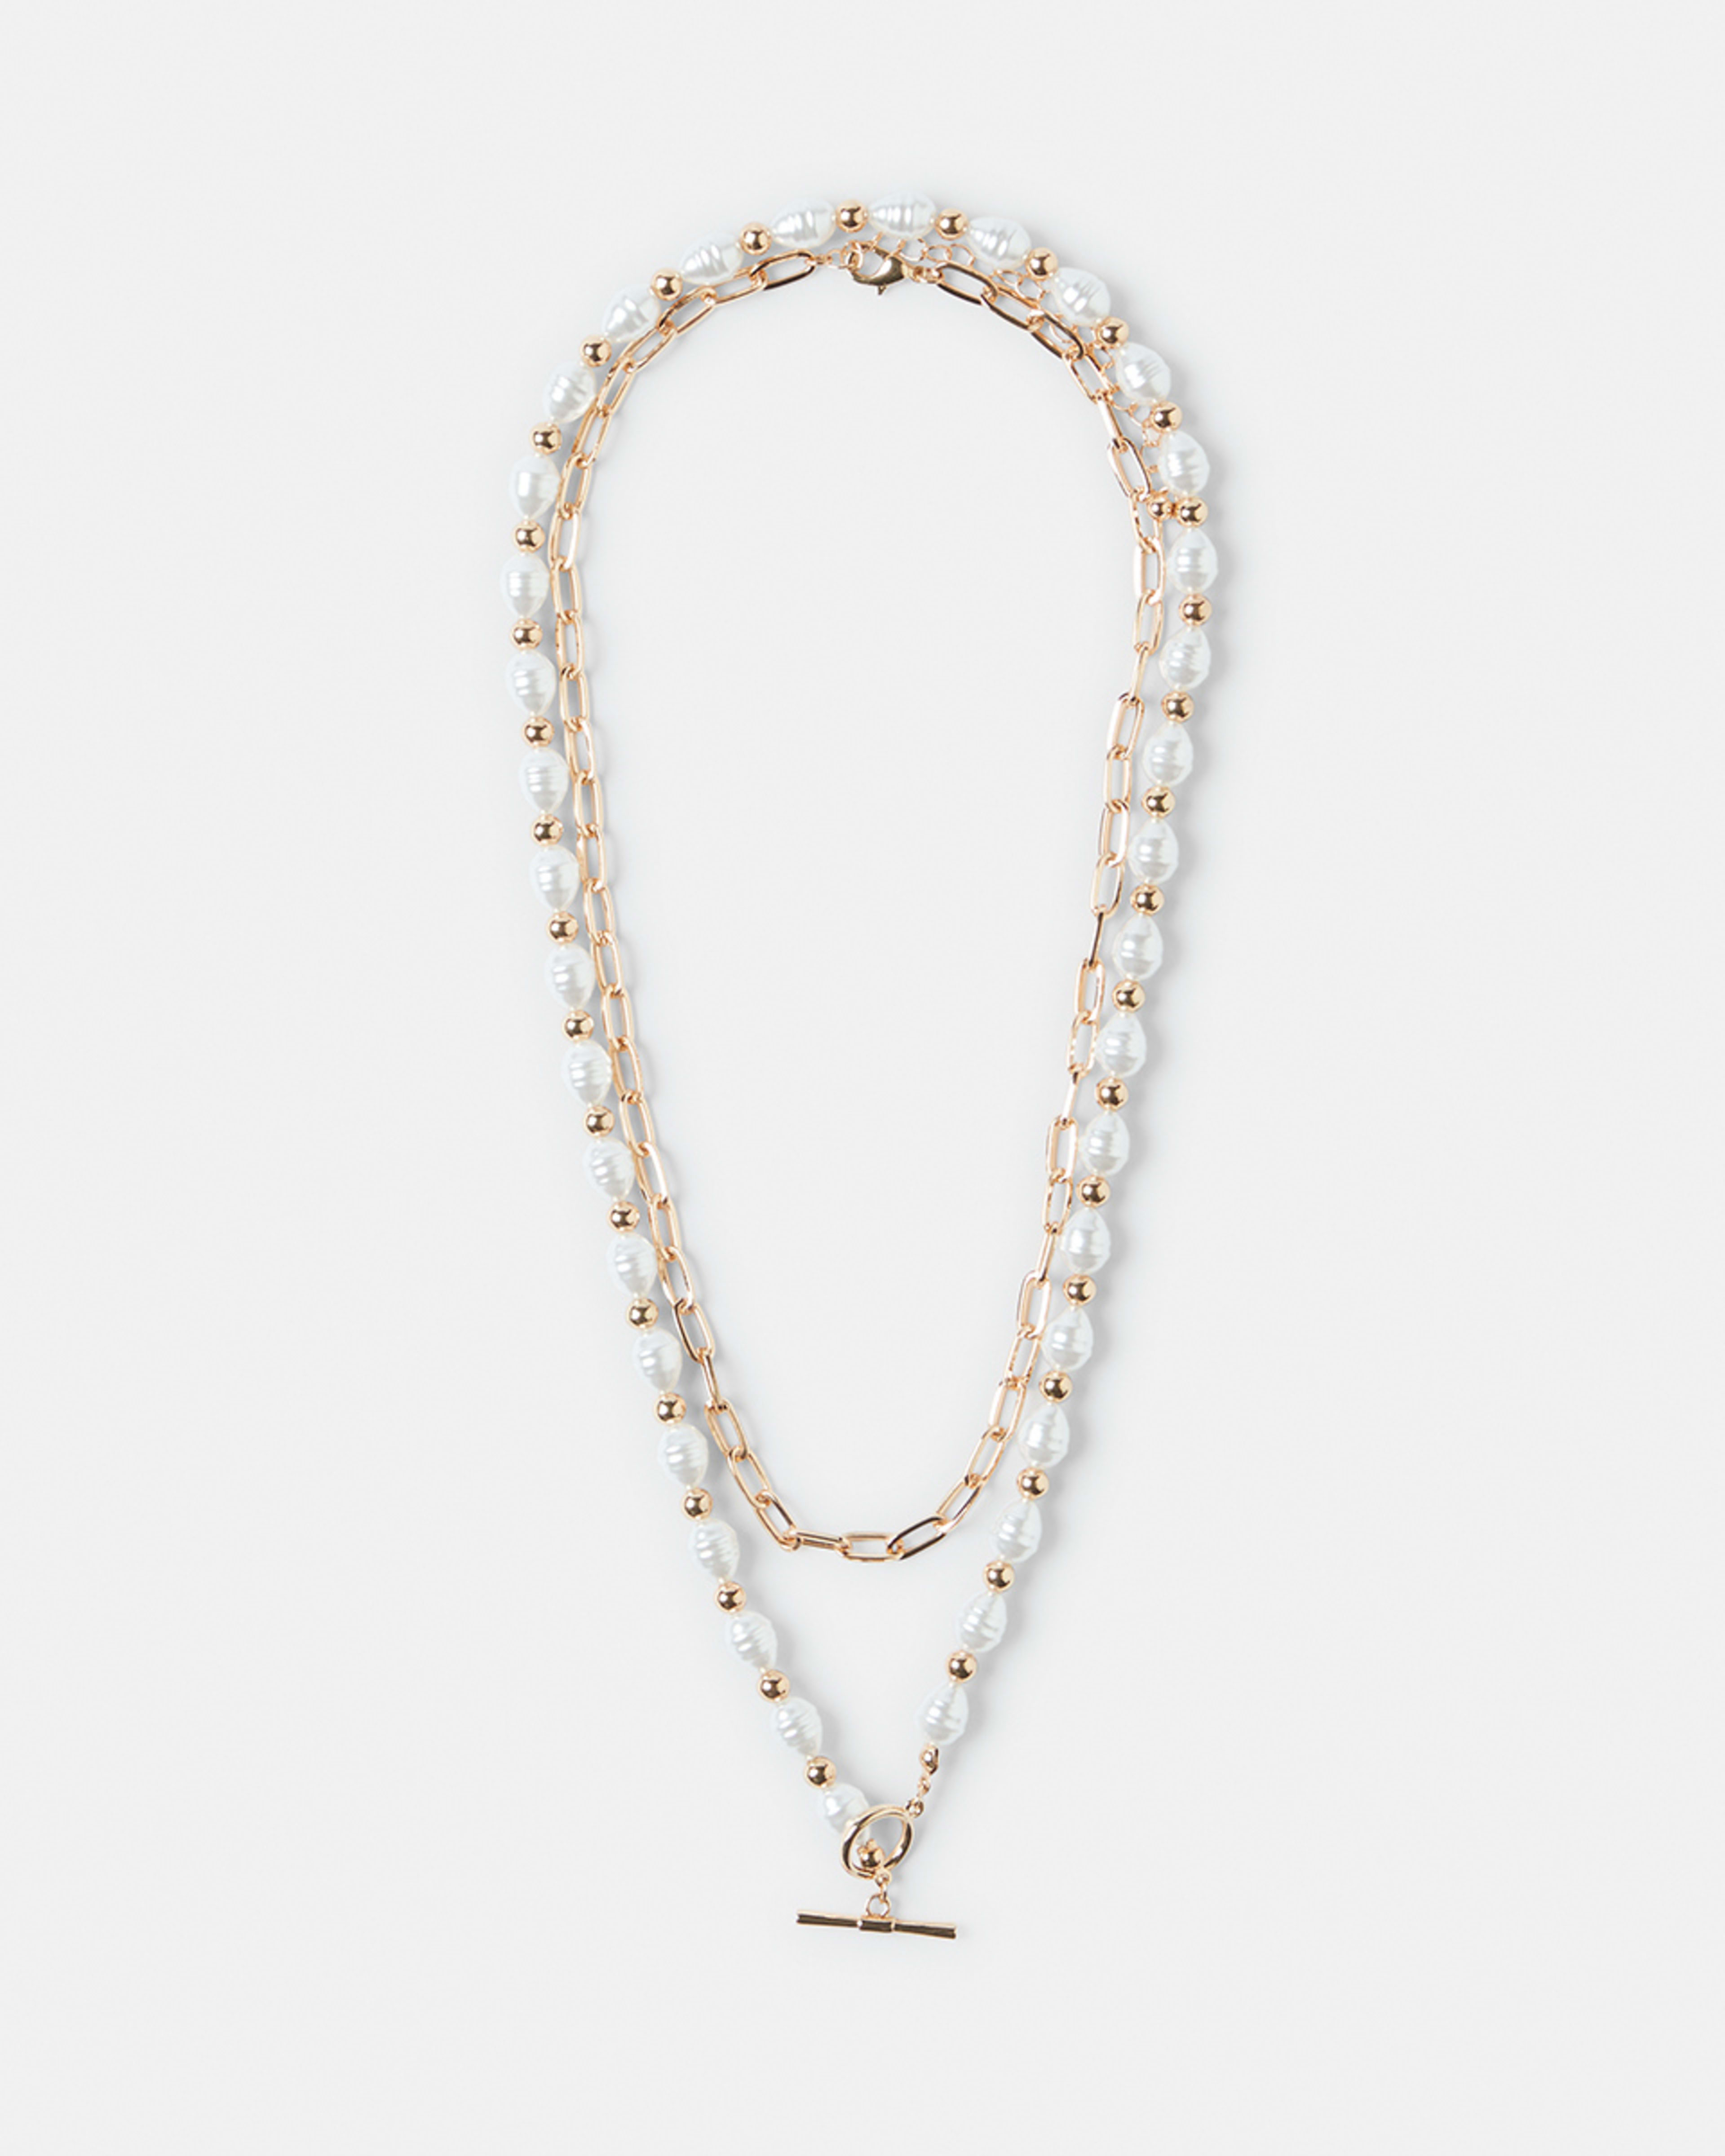 T and O Faux Pearl Necklace - Gold Tone - Kmart